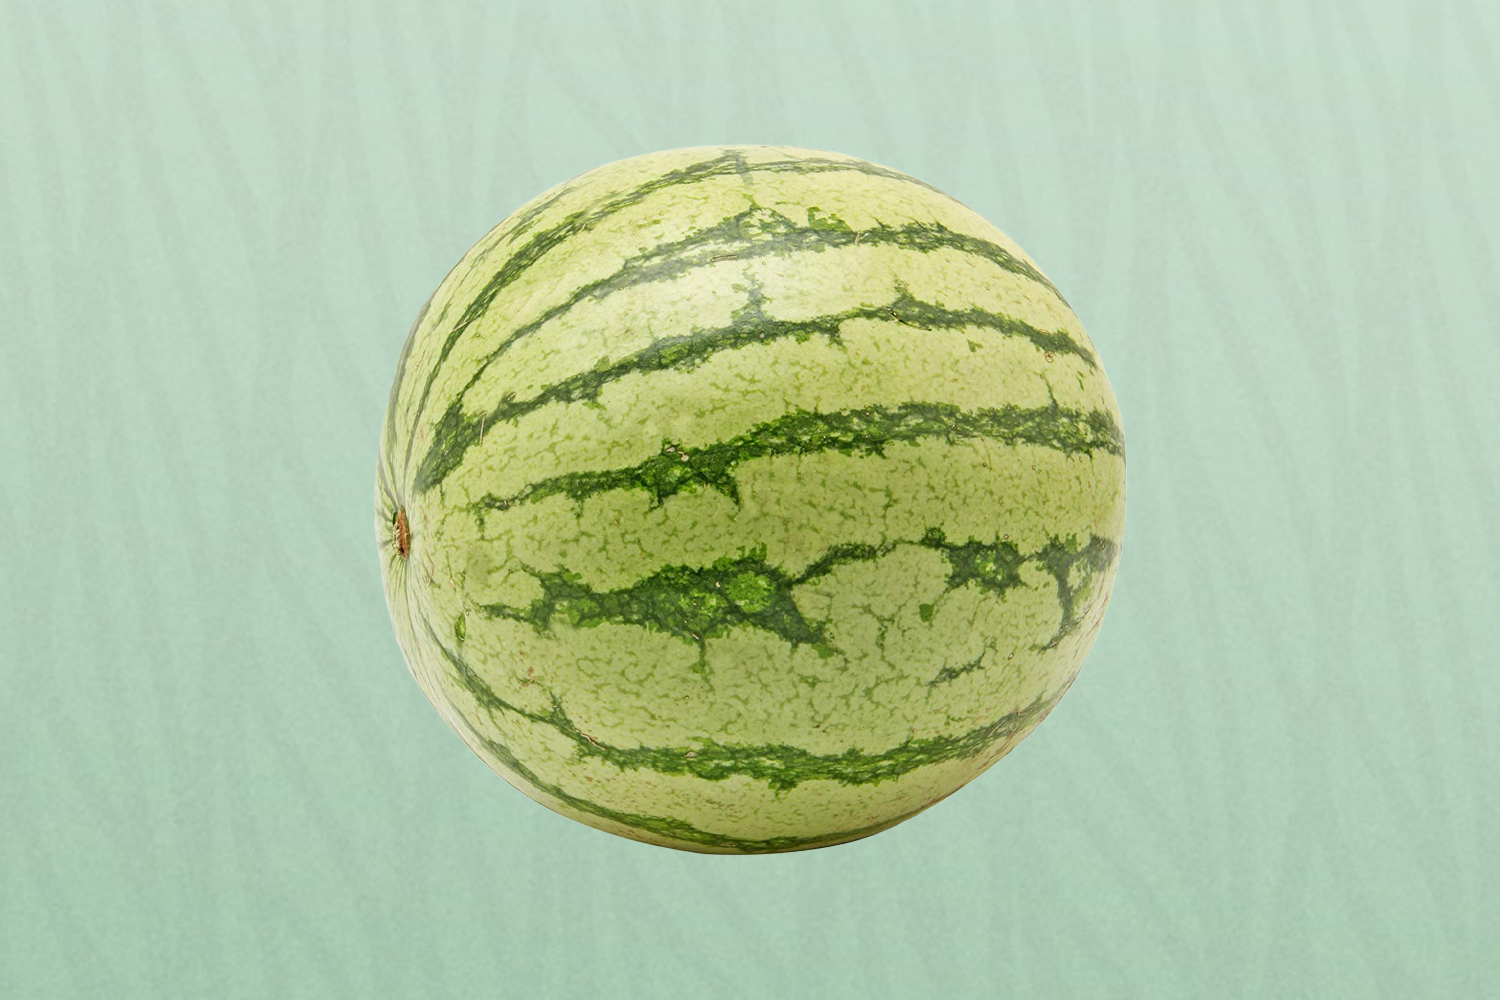 Watermelon is one of the best healthy snacks to eat when you're high in 2022 because it's sweet, flavorful, juicy, and delicious.